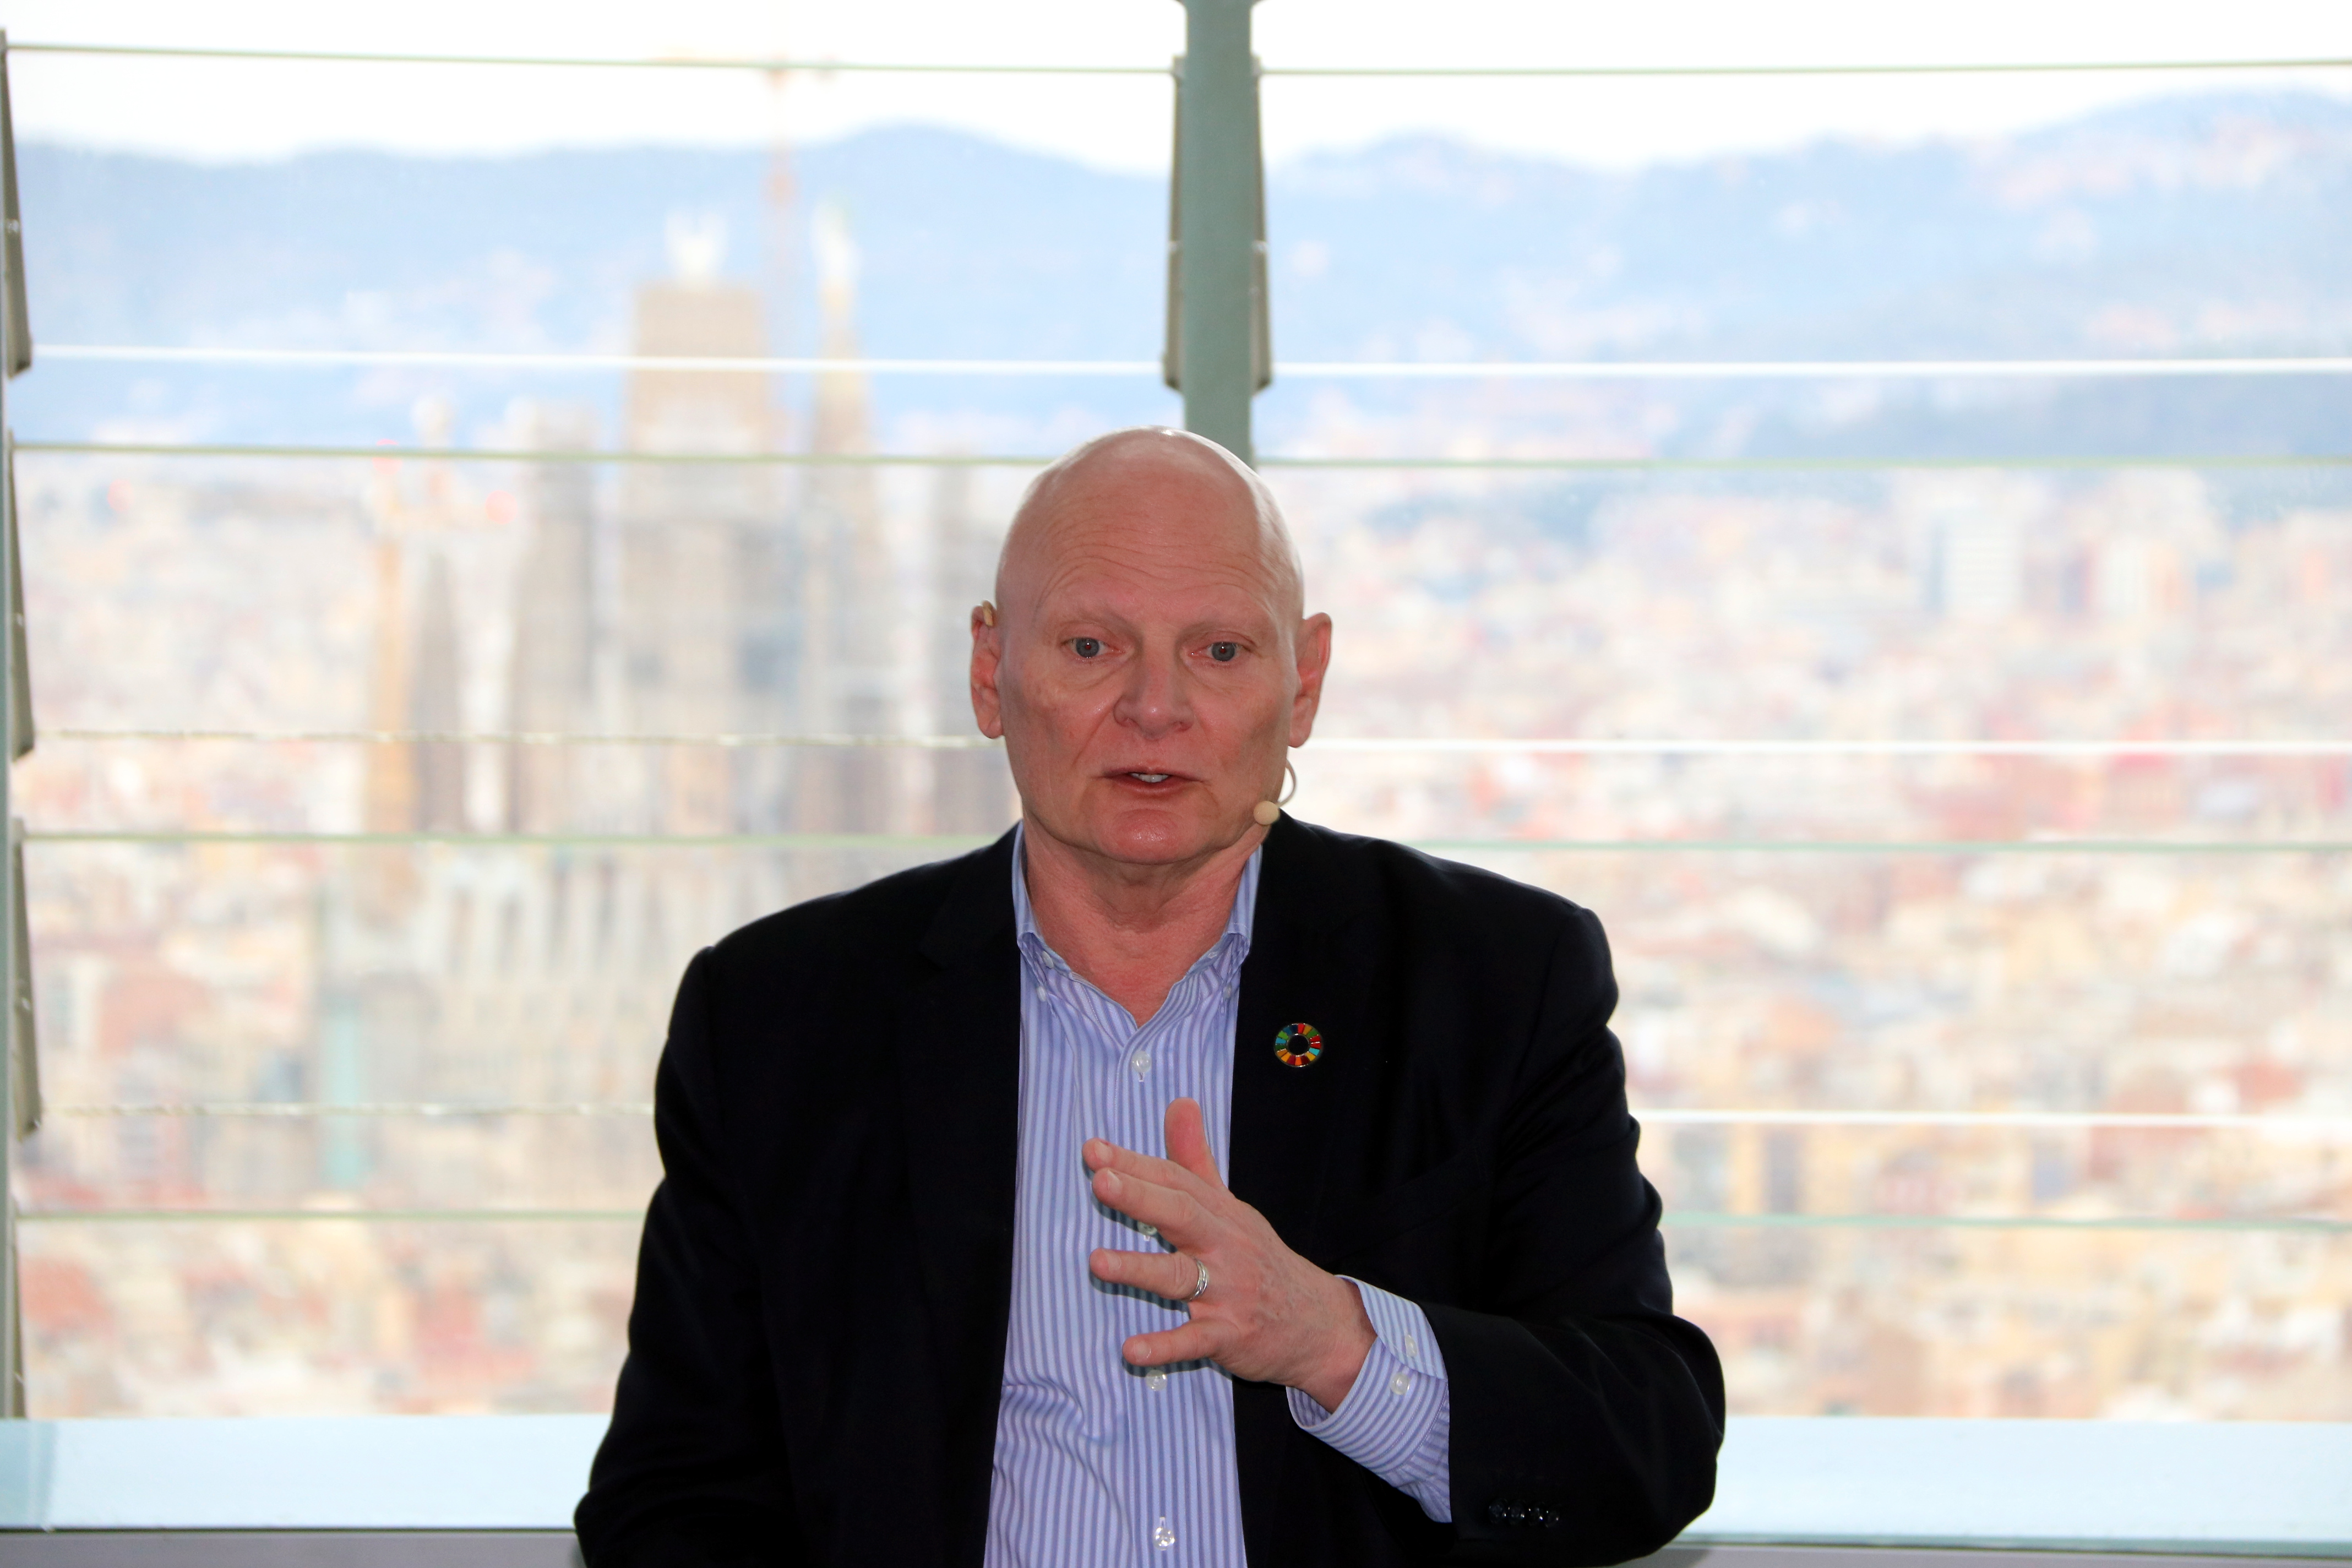 GSMA managing director John Hoffman during a networking event ahead of the MWC23 in the Torre Glòries observation deck on February 25, 2023